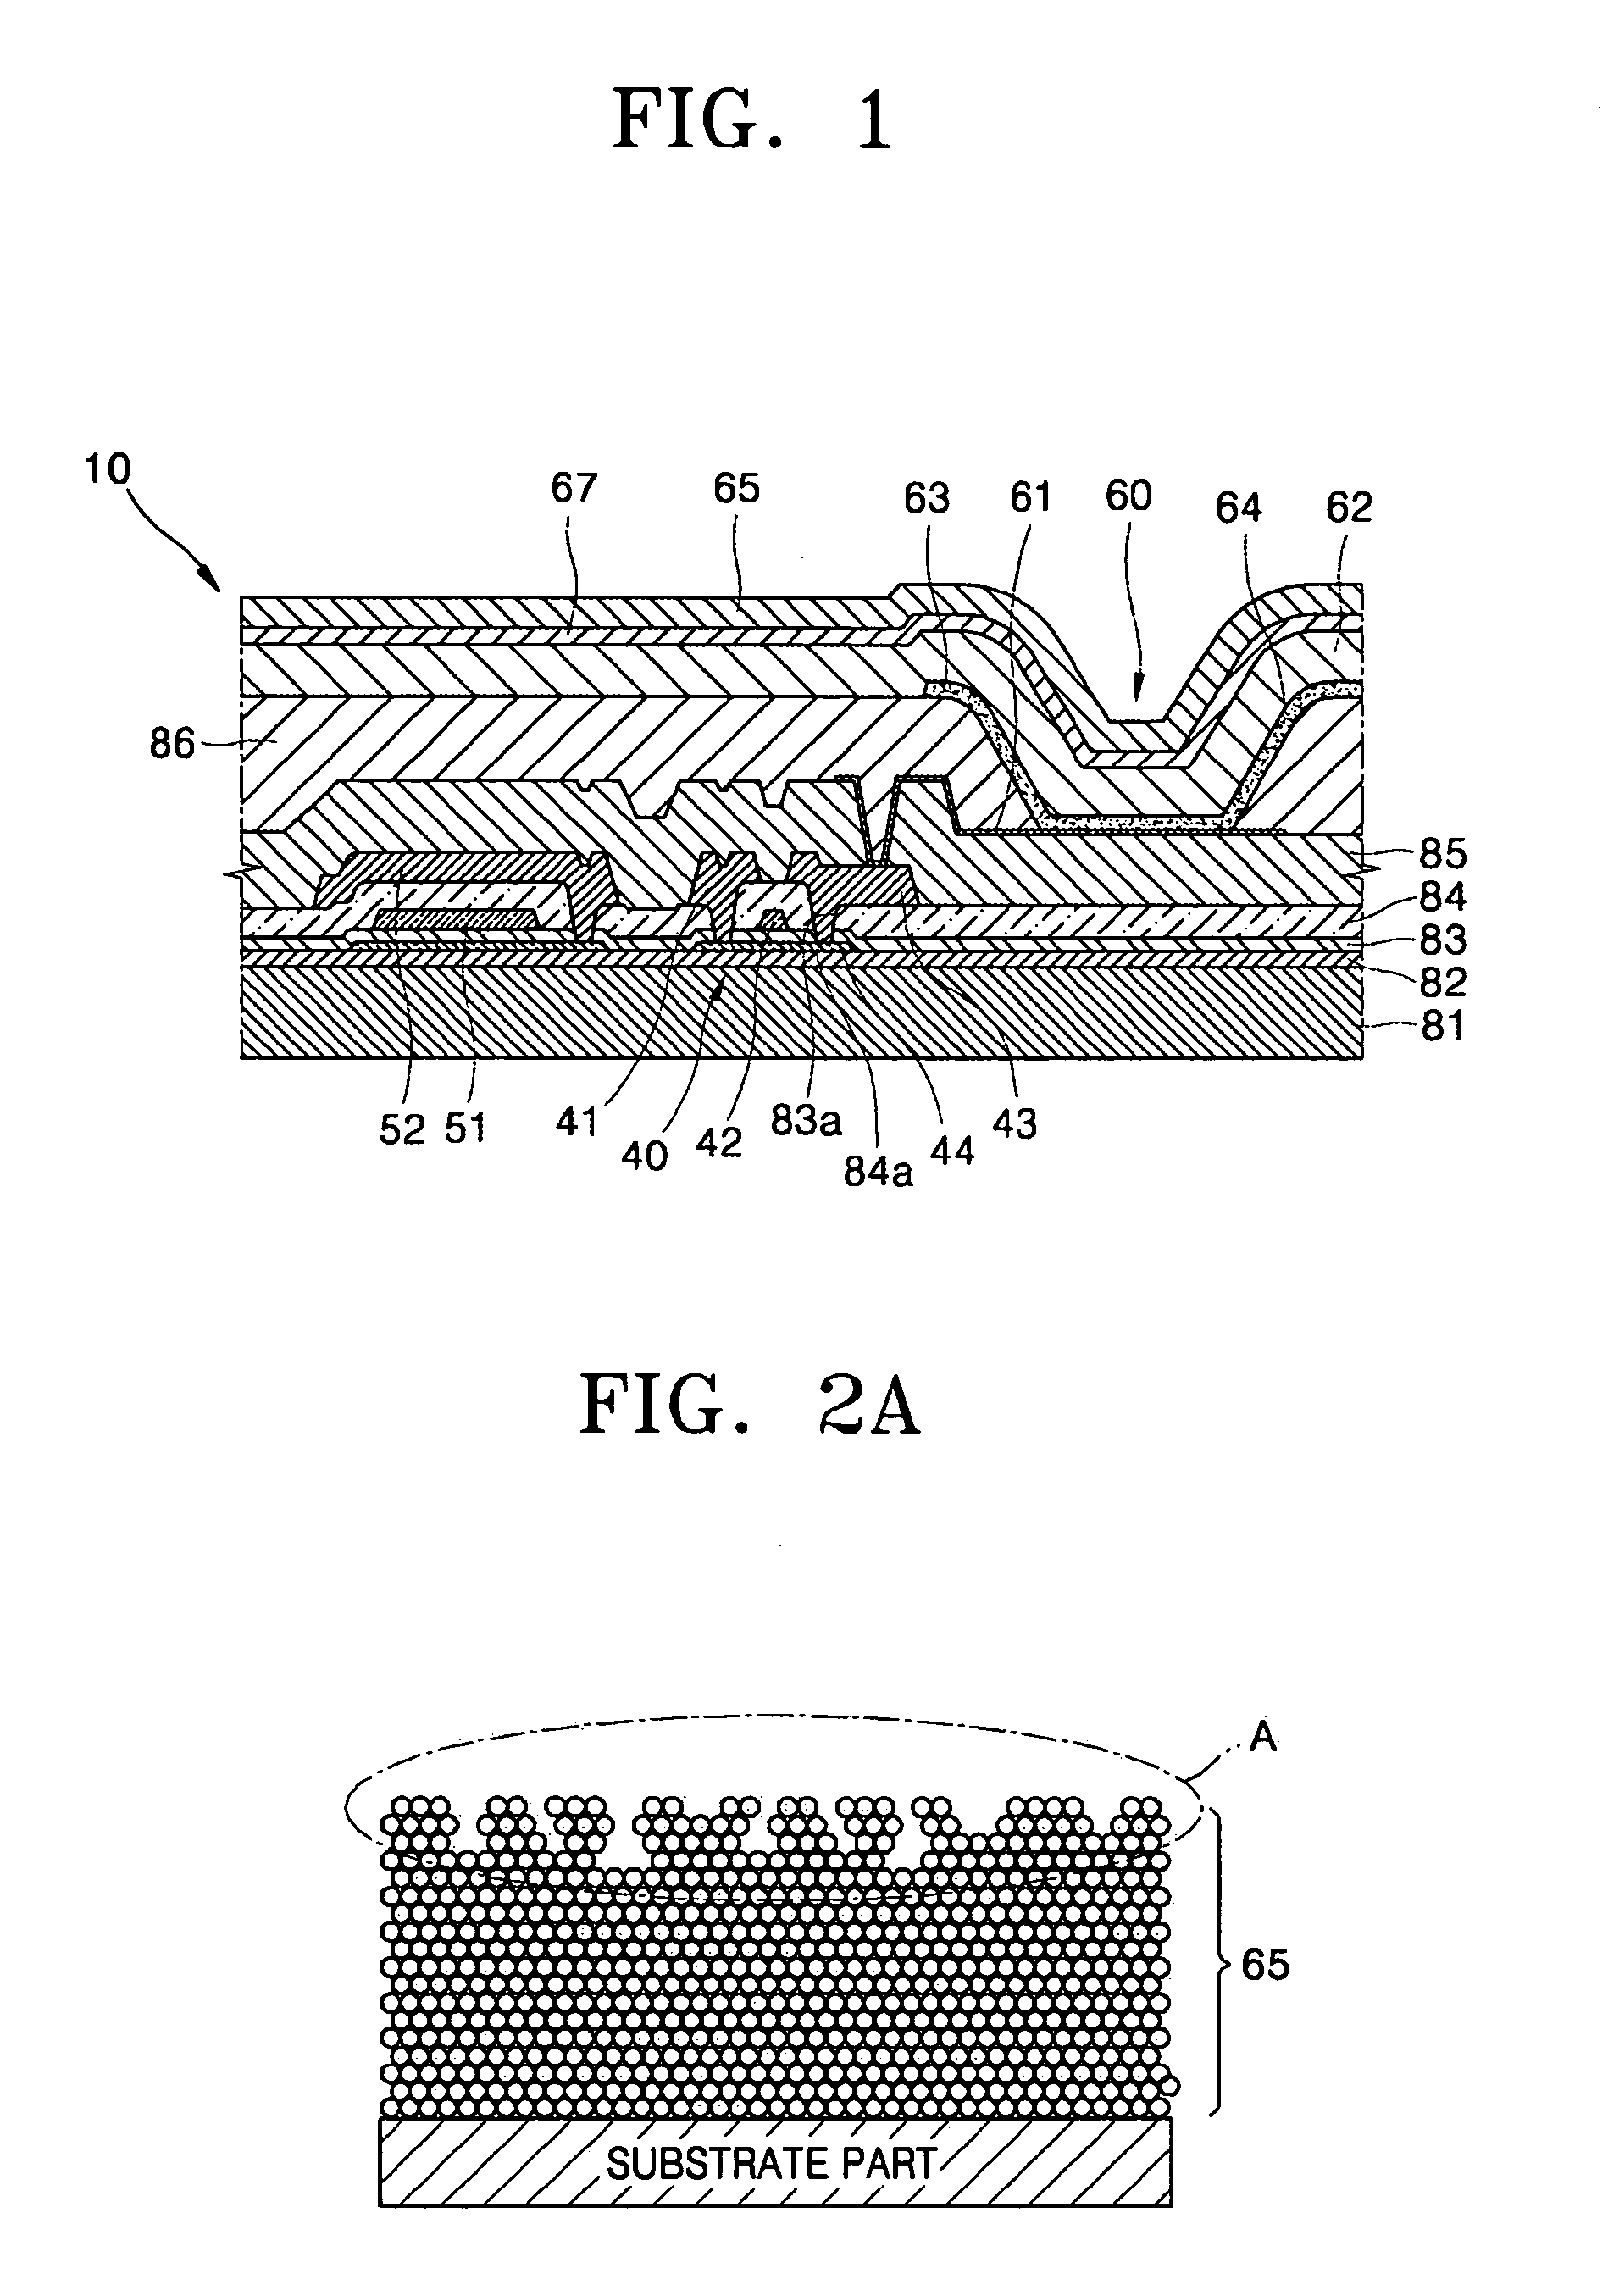 Organic electroluminescent display device and method of preparing the same